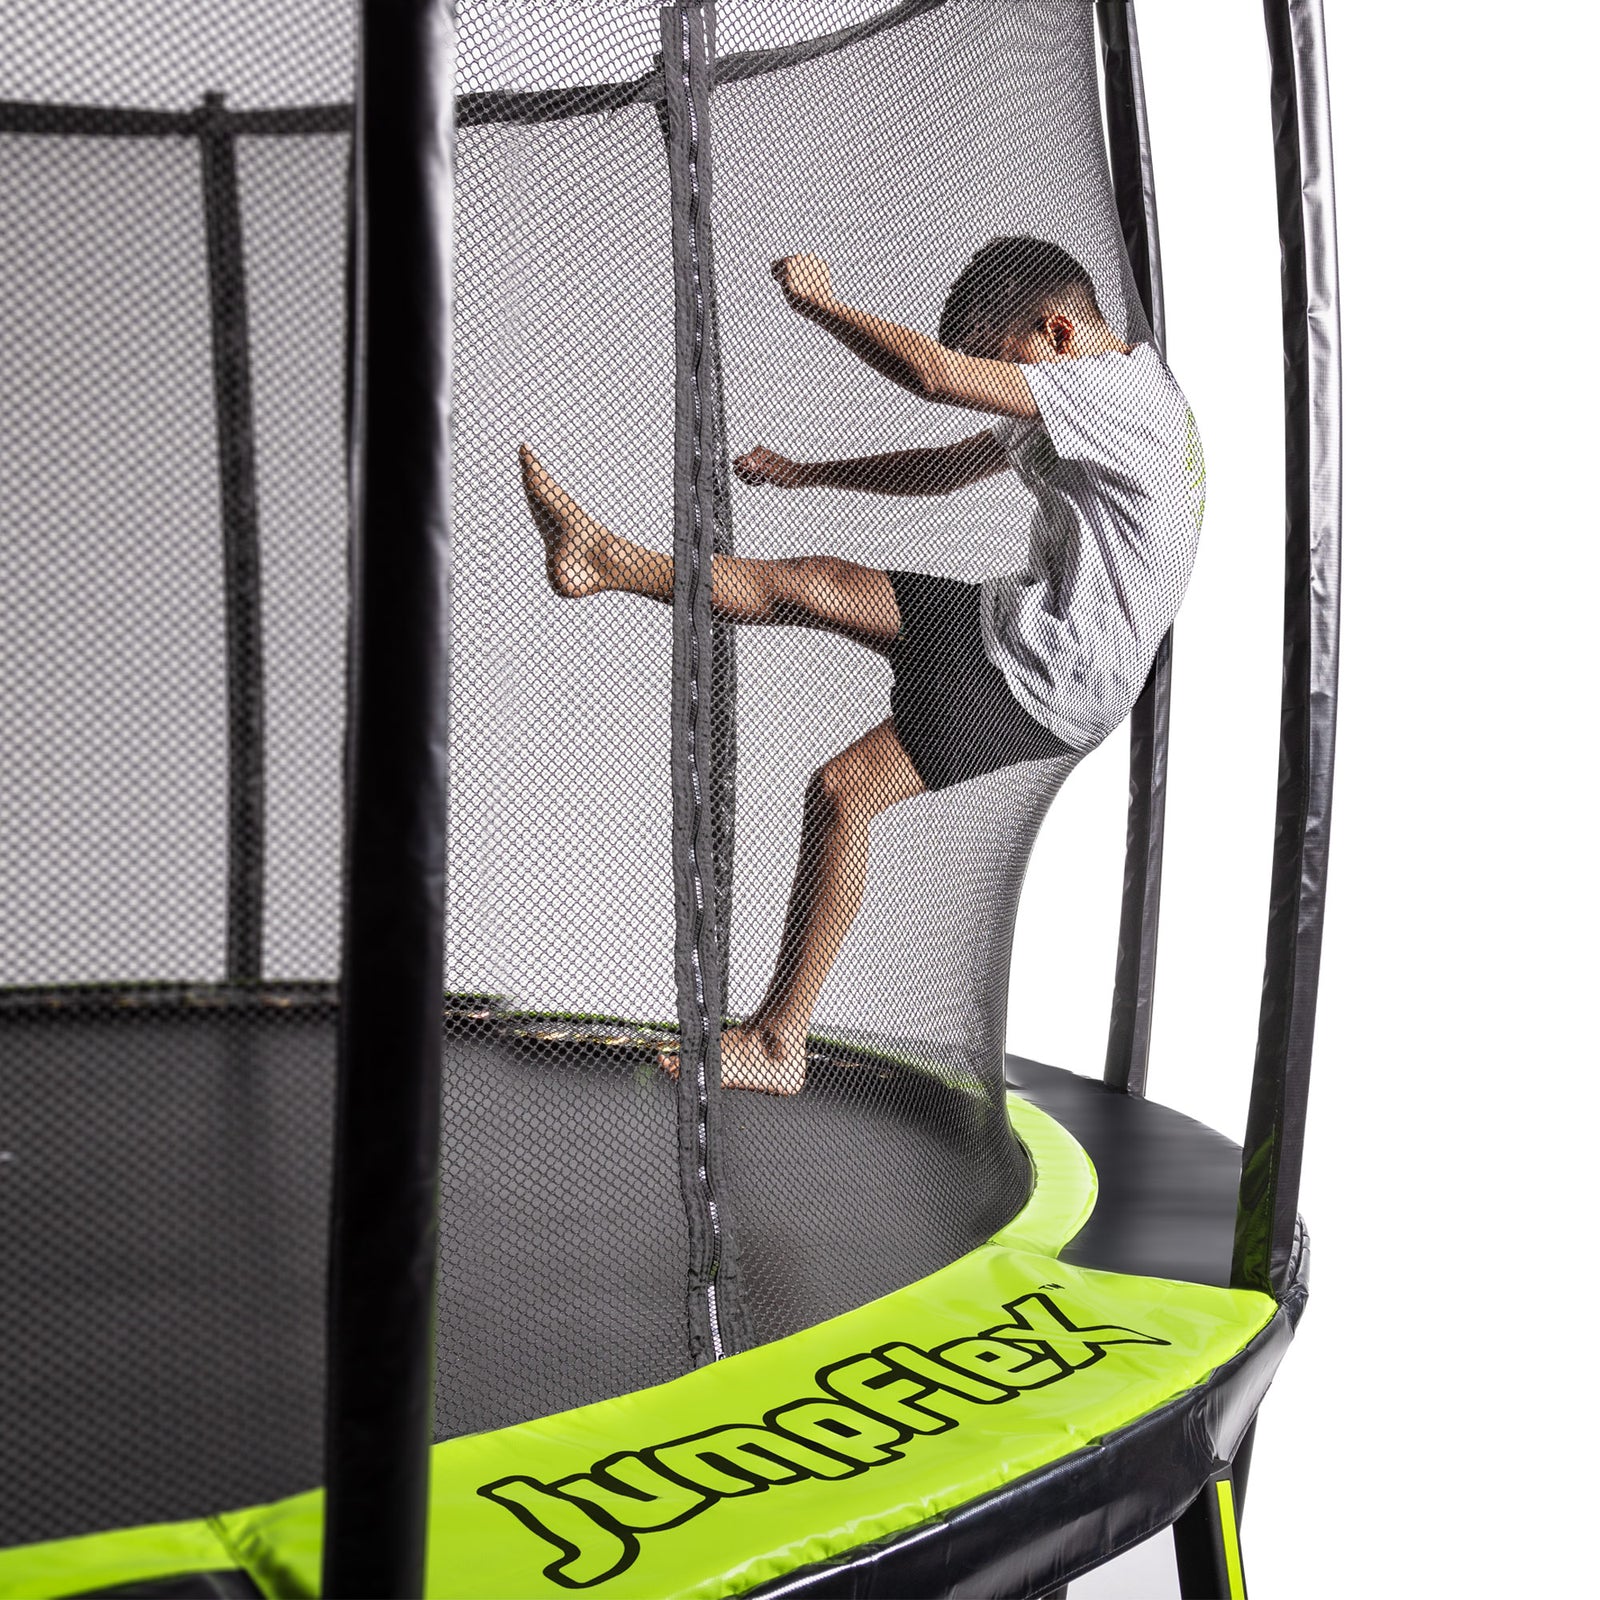 Jumpflex Hero trampolines have more space between you and the poles